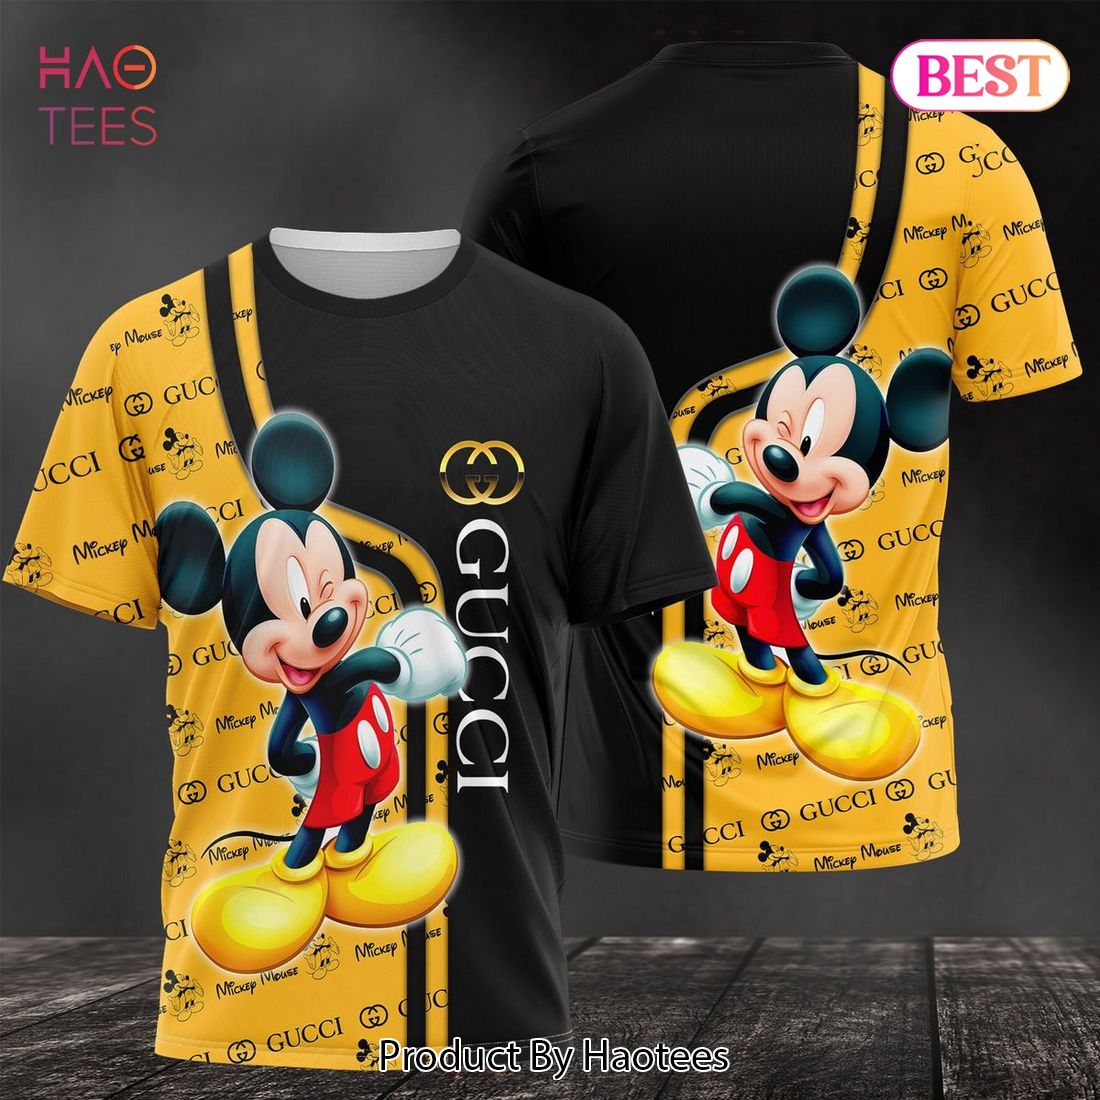 THE BEST Gucci Black Mickey Mouse Glod Mix Black Luxury Color 3D T-Shirt Limited Edition